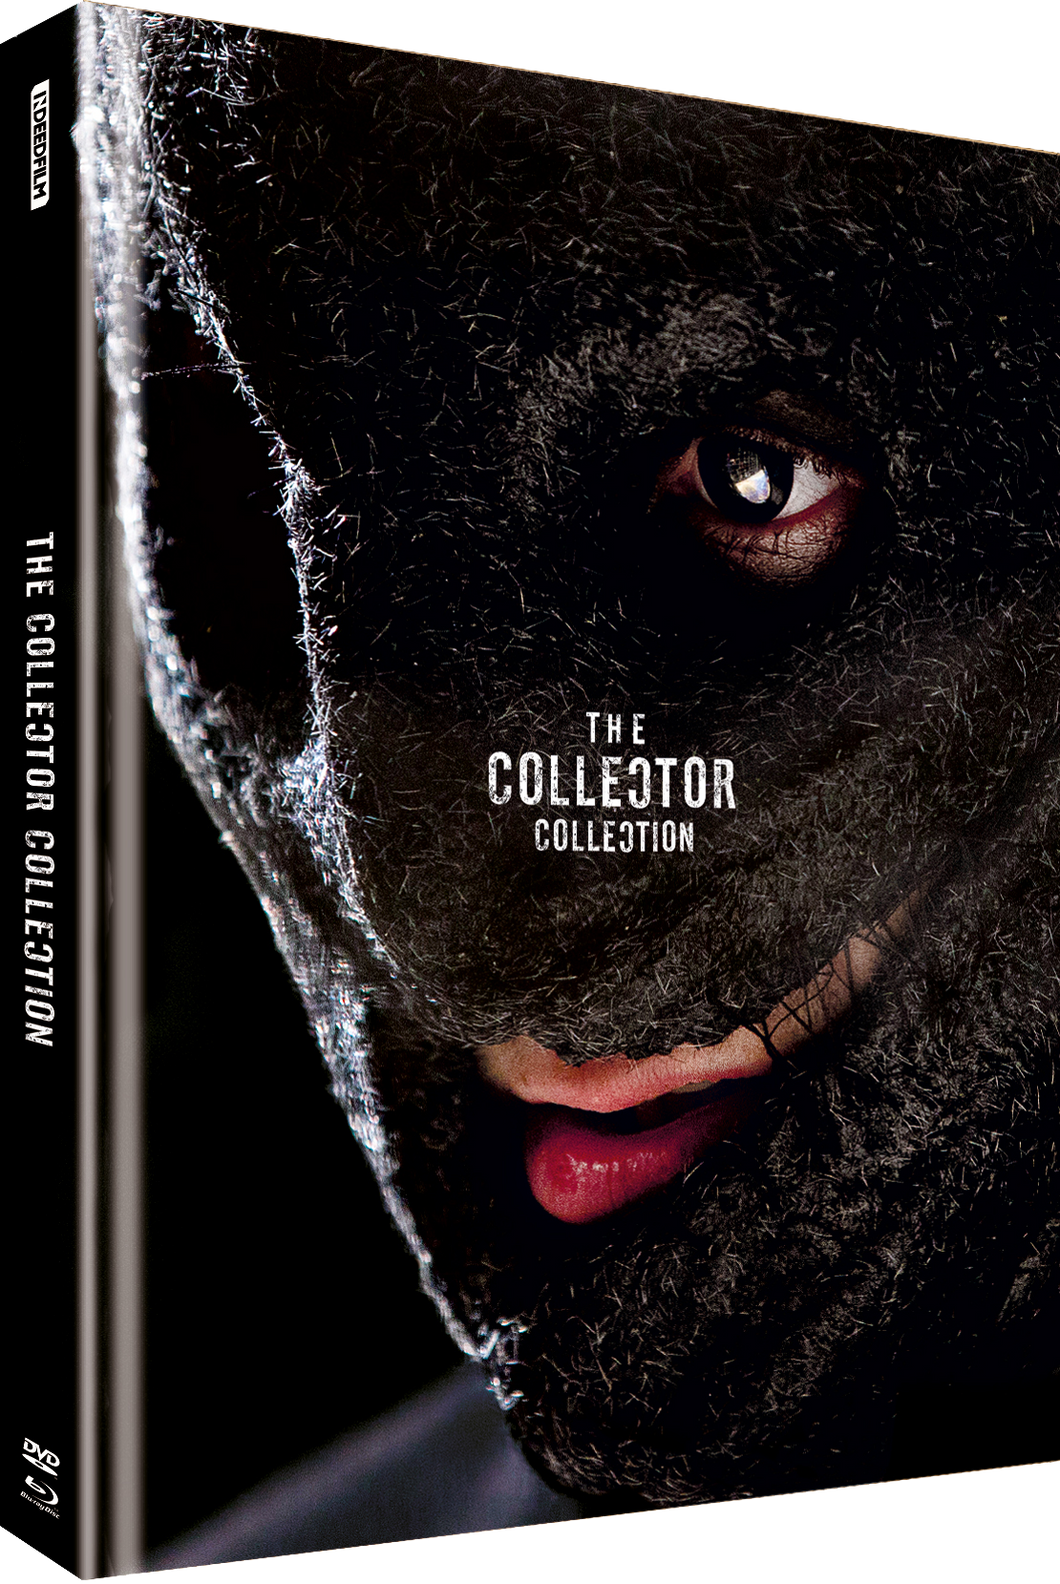 THE COLLECTOR COLLECTION 4-Disc Uncut Limited Double Feature Edition im MediaBook (wattiert) - lim 666